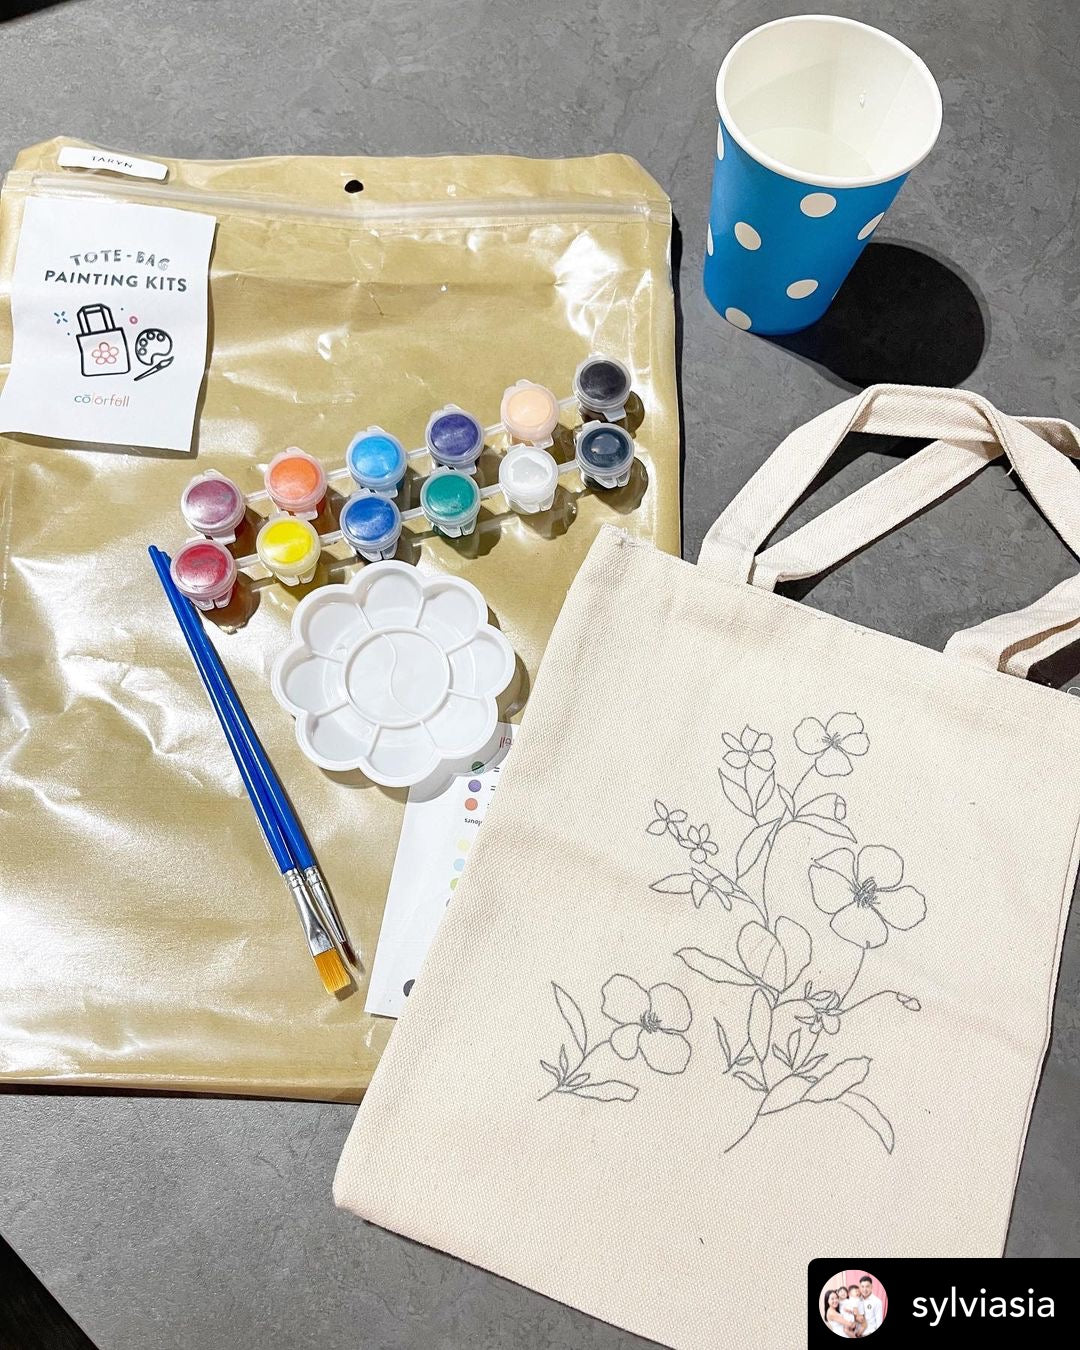 DIY Tote Bag Painting Kit - Ages 3 to 5